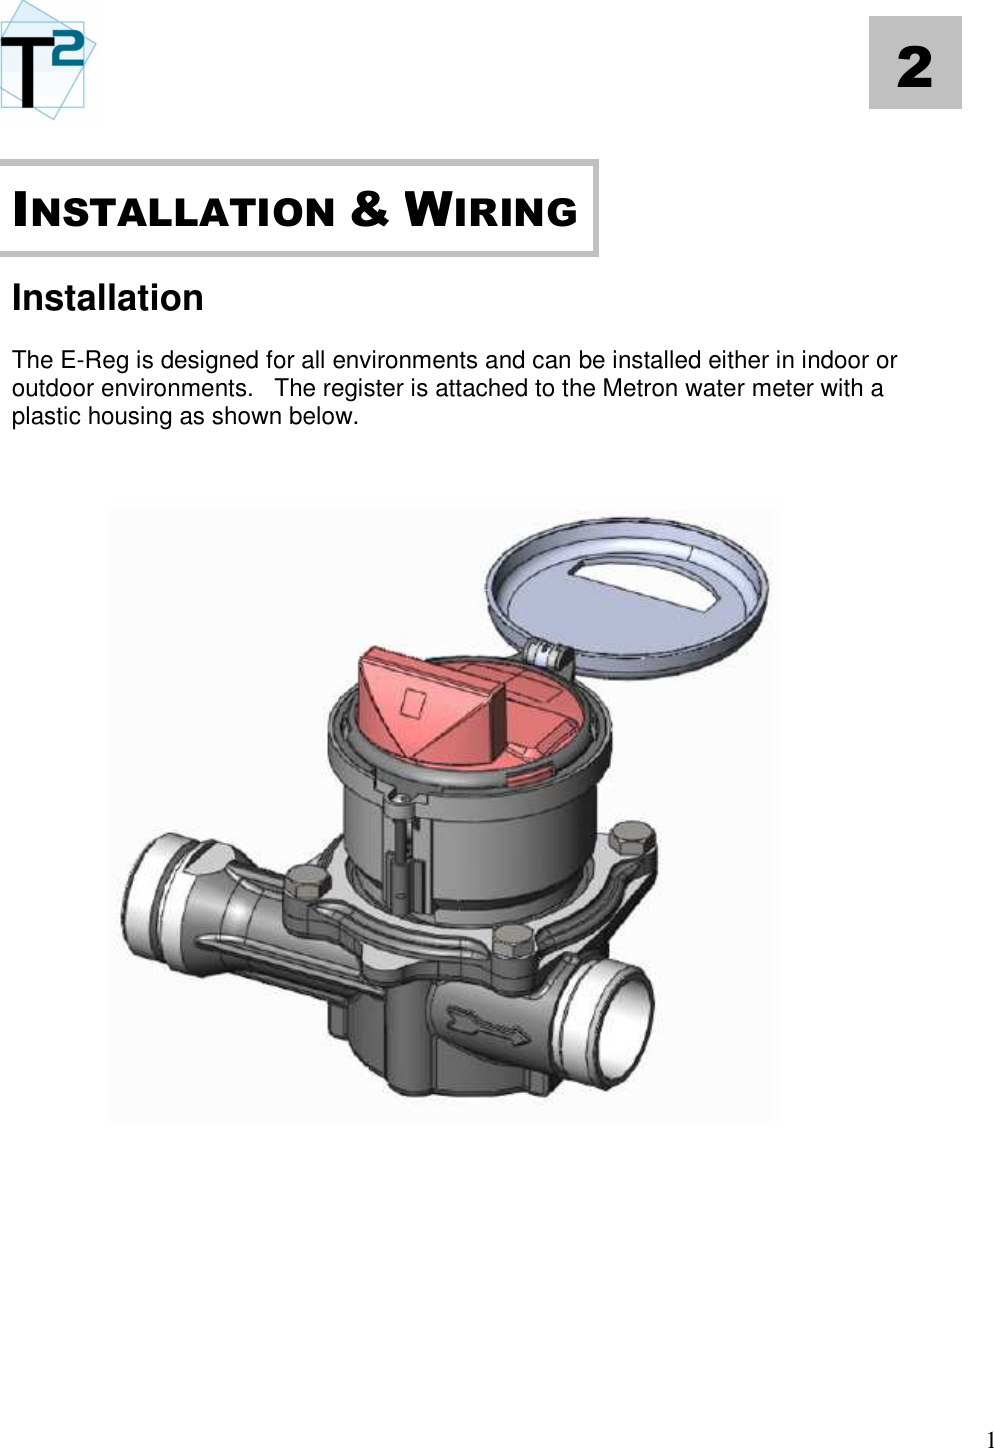   1 2       Installation  The E-Reg is designed for all environments and can be installed either in indoor or outdoor environments.   The register is attached to the Metron water meter with a plastic housing as shown below.                       INSTALLATION &amp; WIRING 